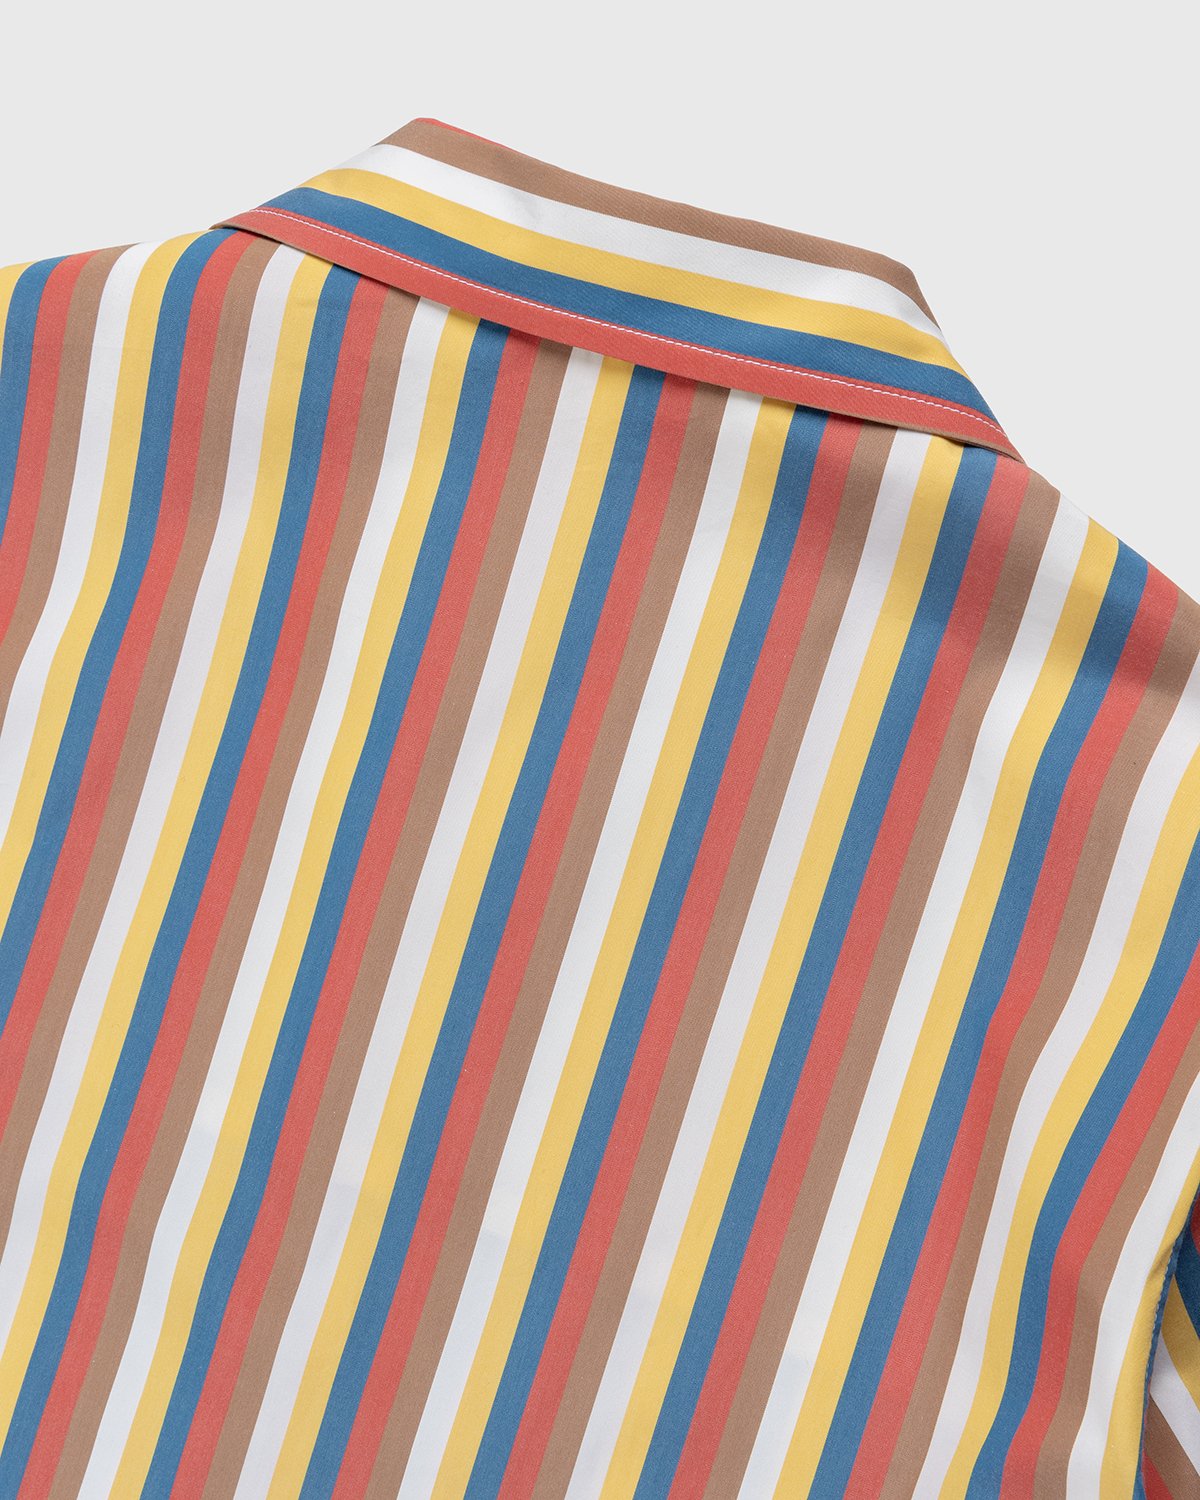 Jil Sander - Striped Vacation Shirt Red/White - Clothing - Red - Image 4